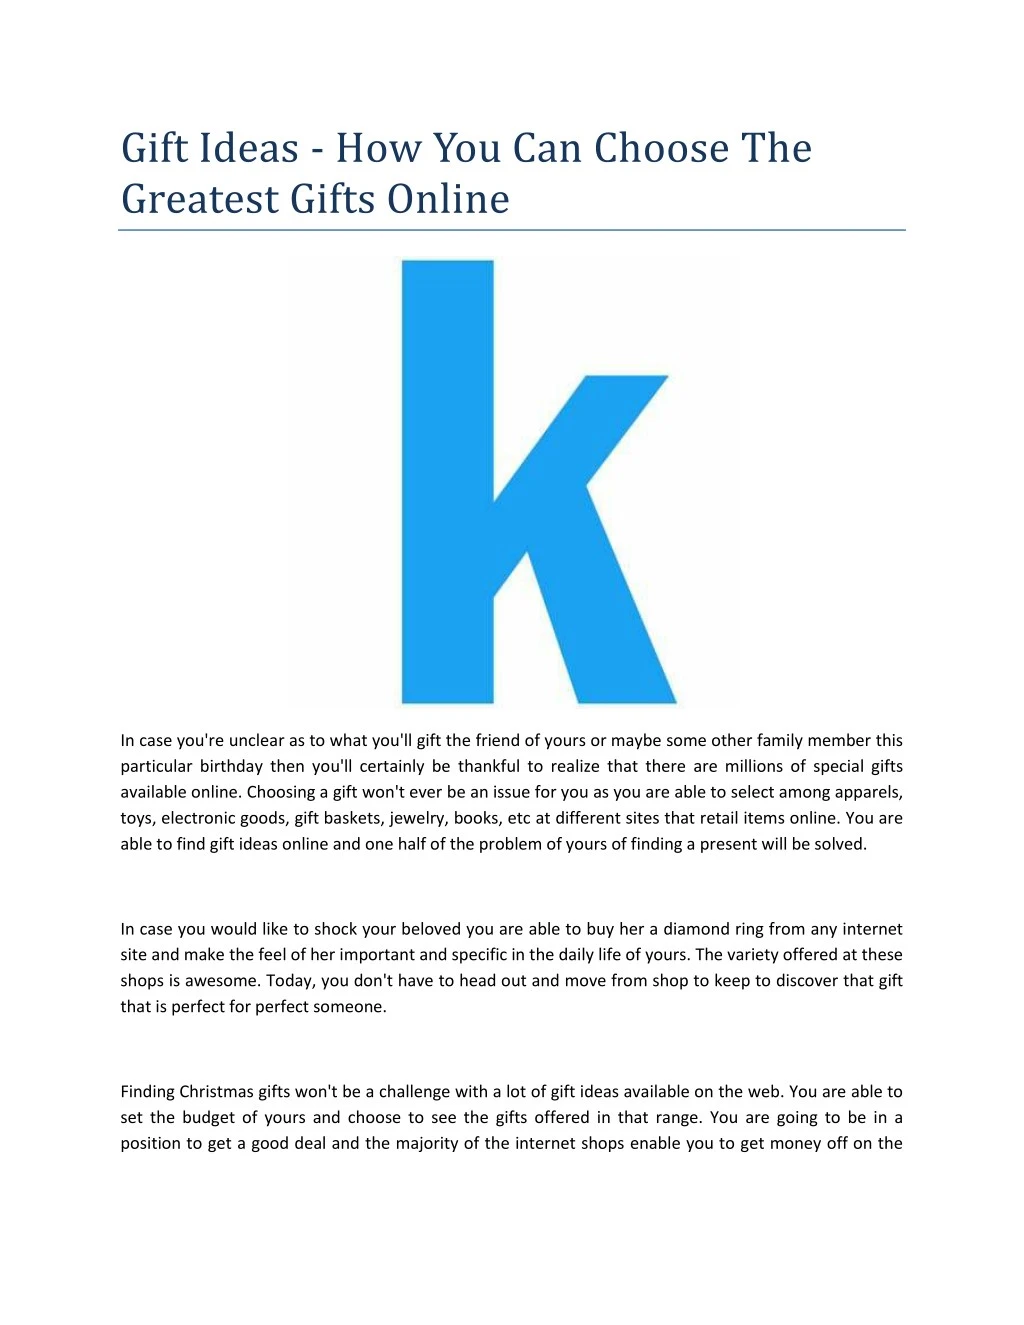 gift ideas how you can choose the greatest gifts